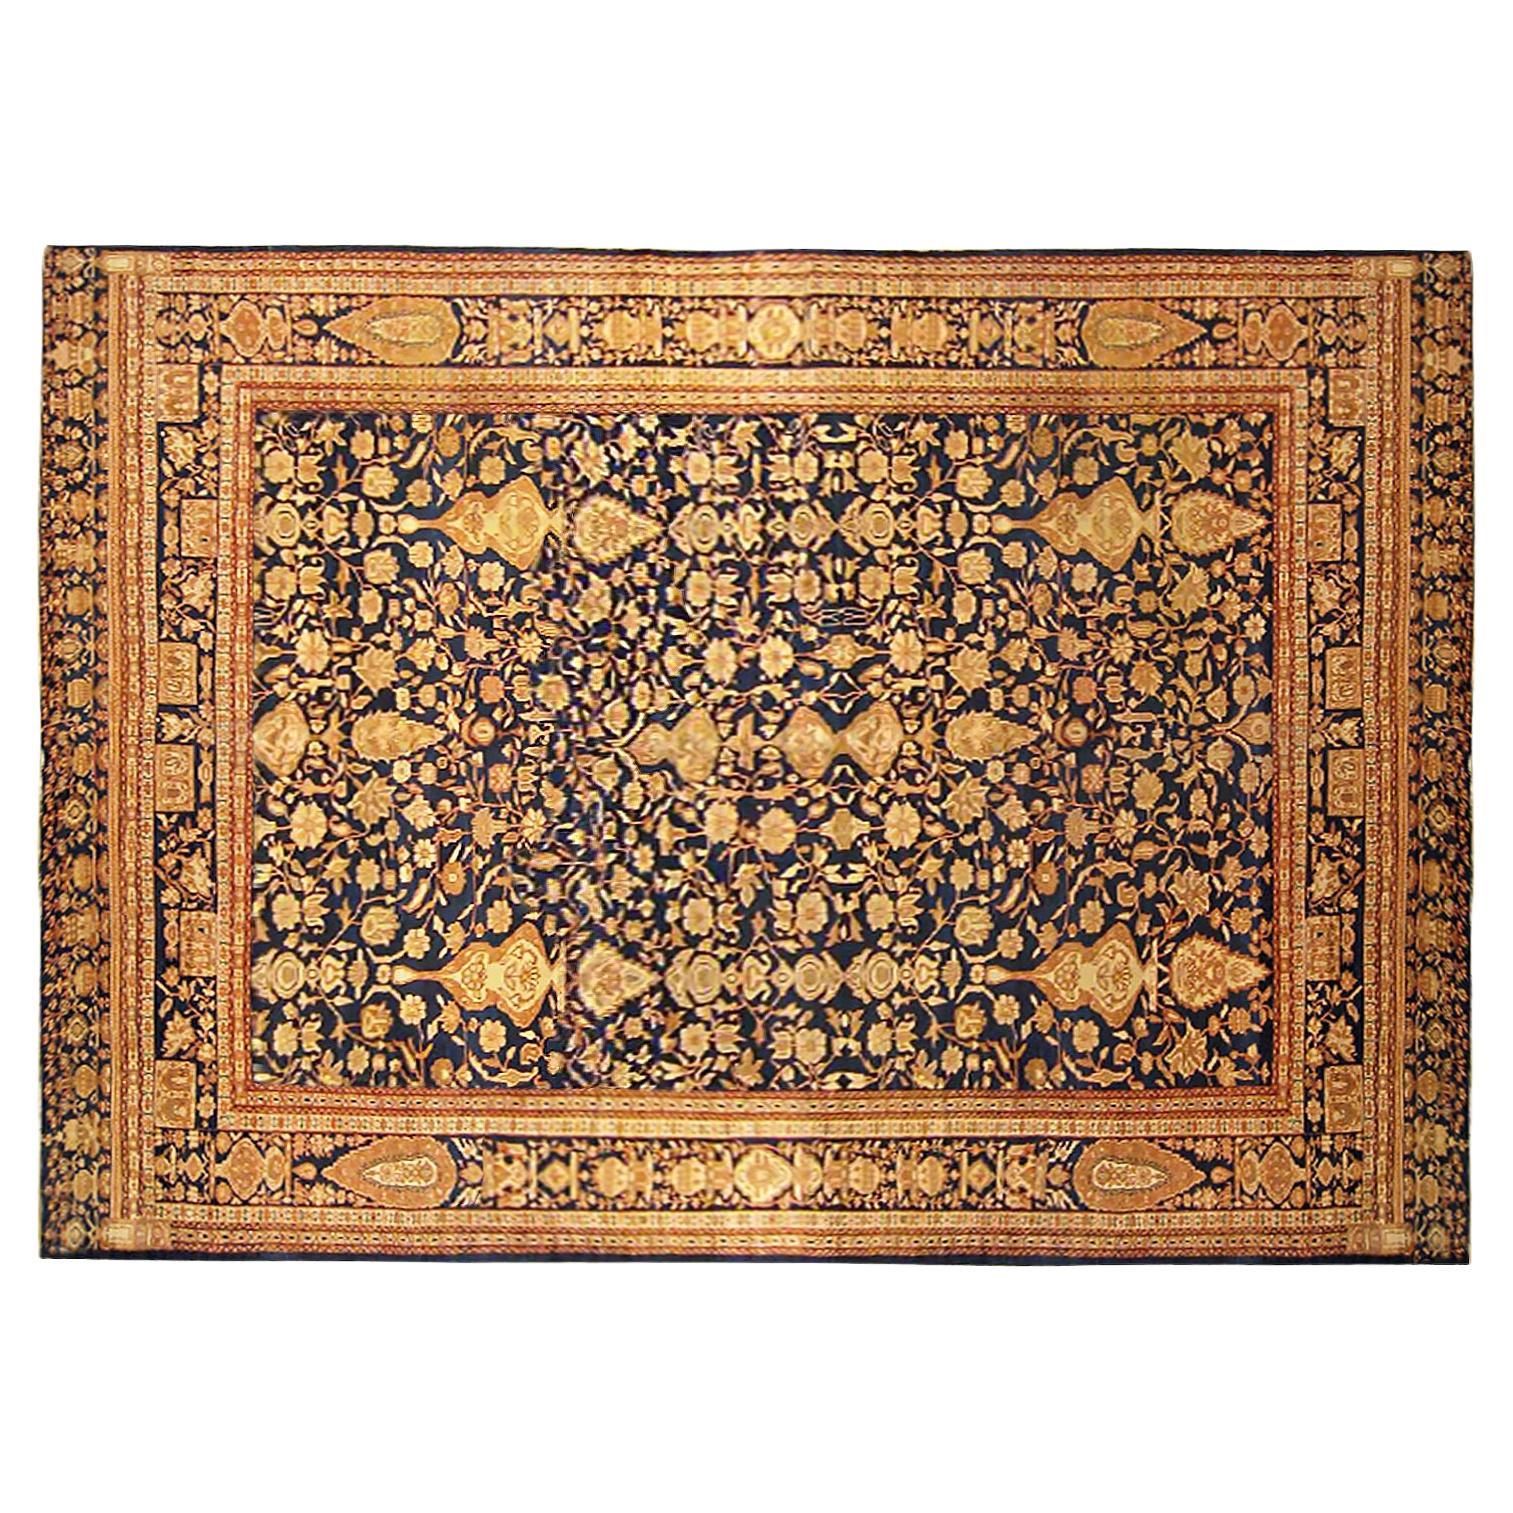 Antique Ferahan Sarouk Oriental Rug, in Room Size, with Intricate Floral Design